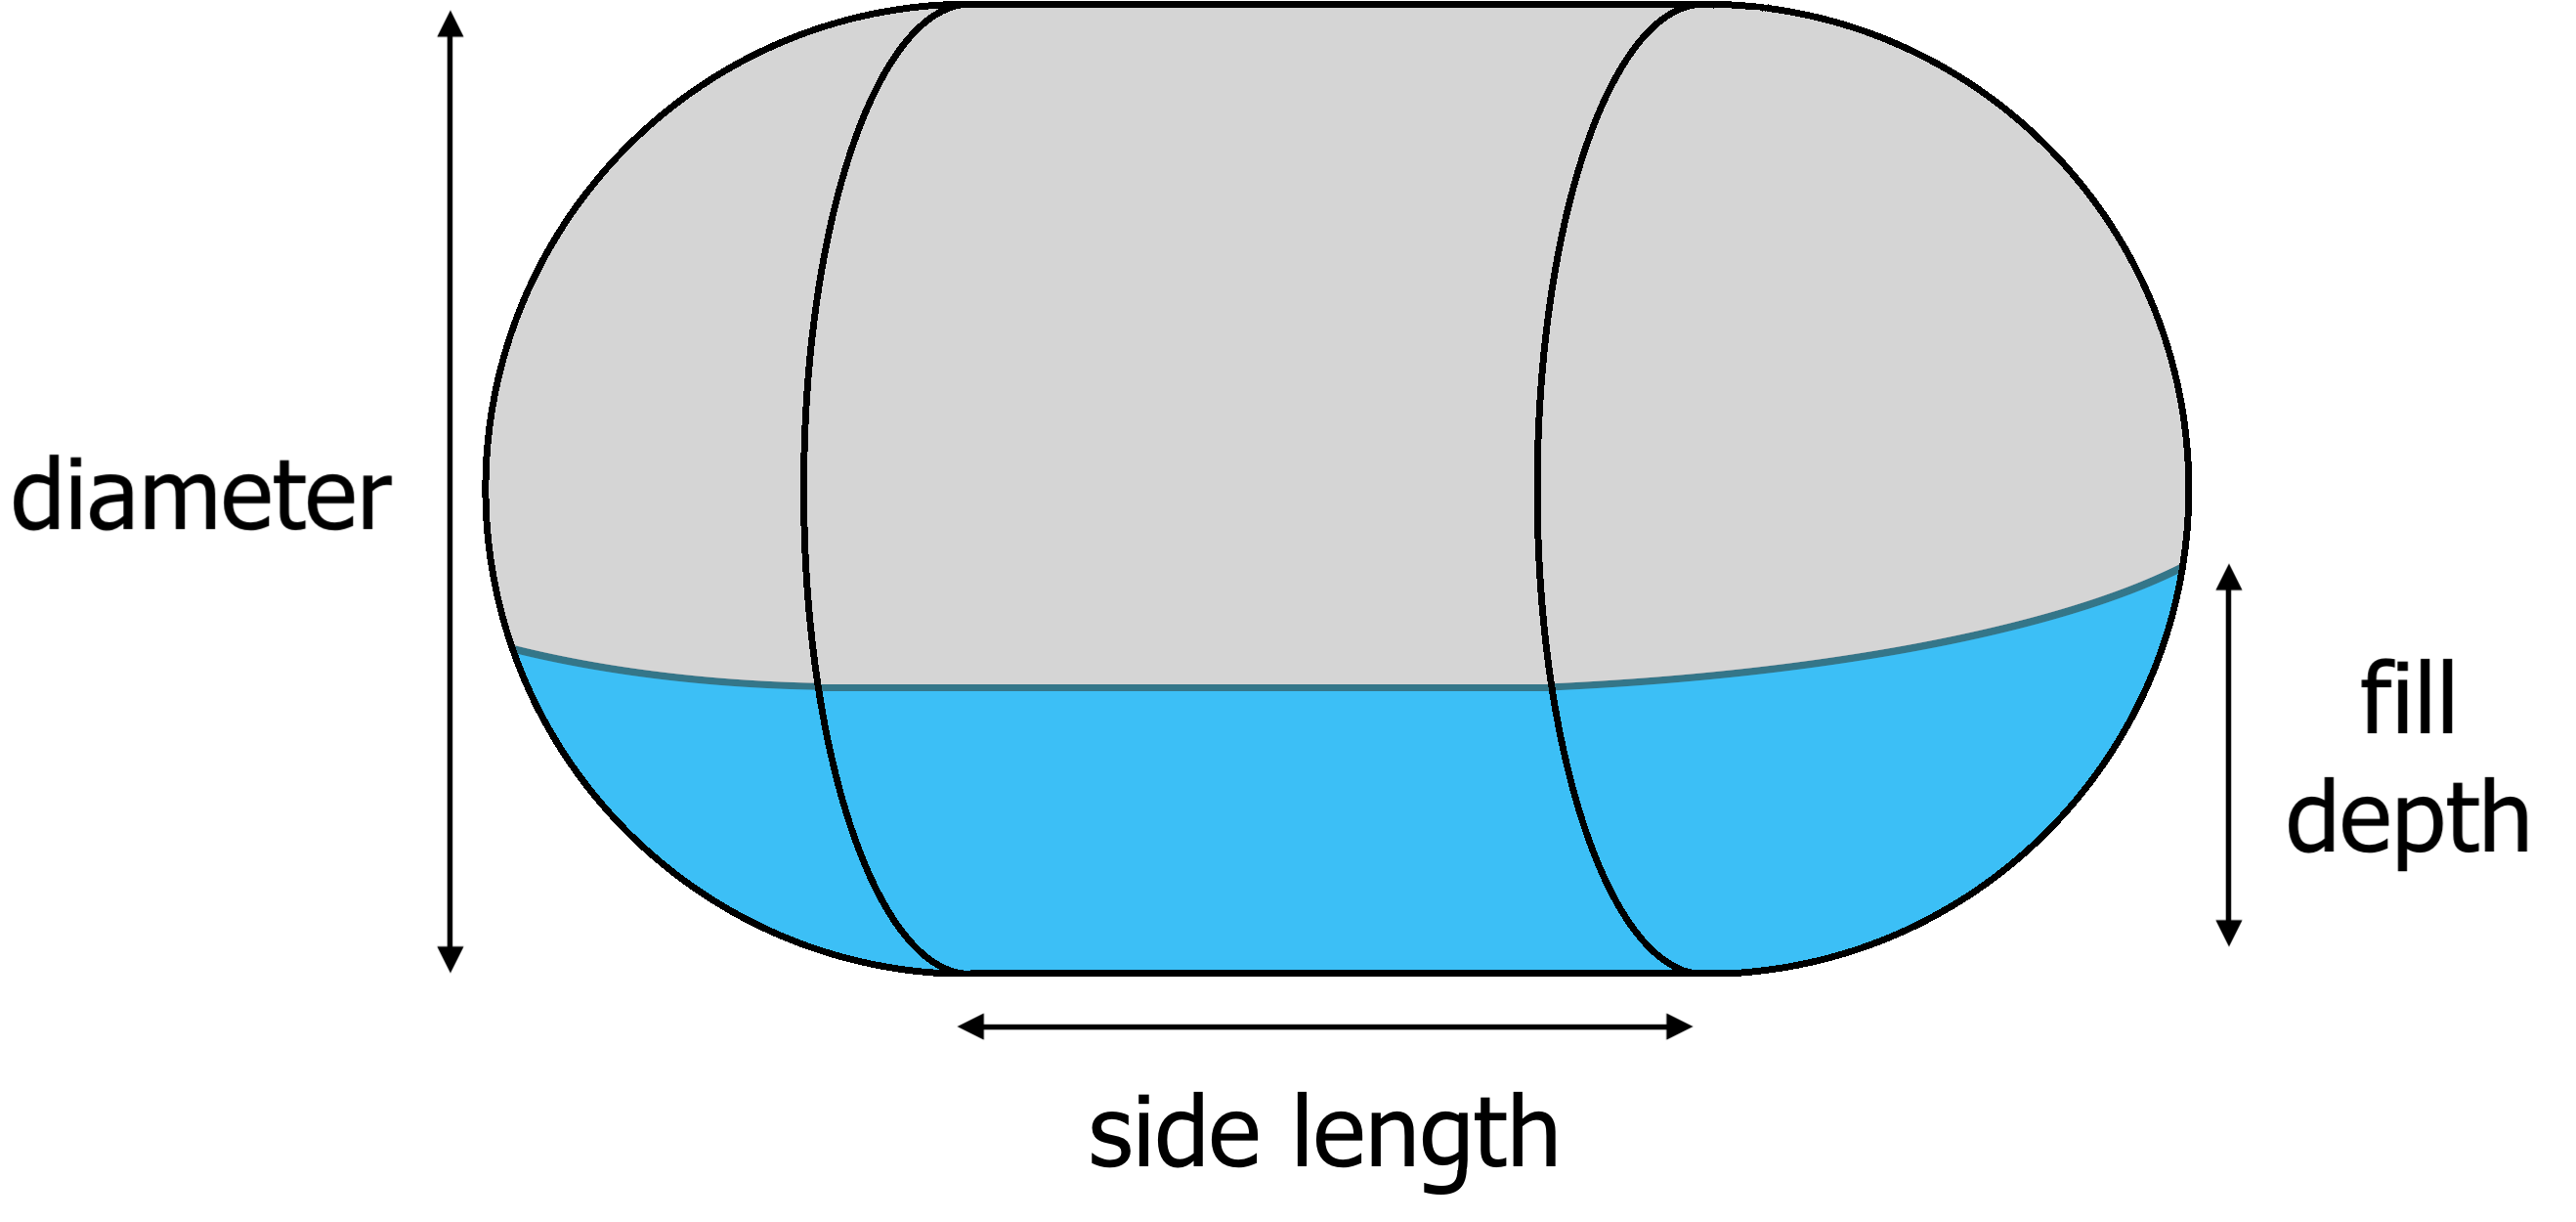 Diagram of a capsule tank showing the diameter and length dimensions